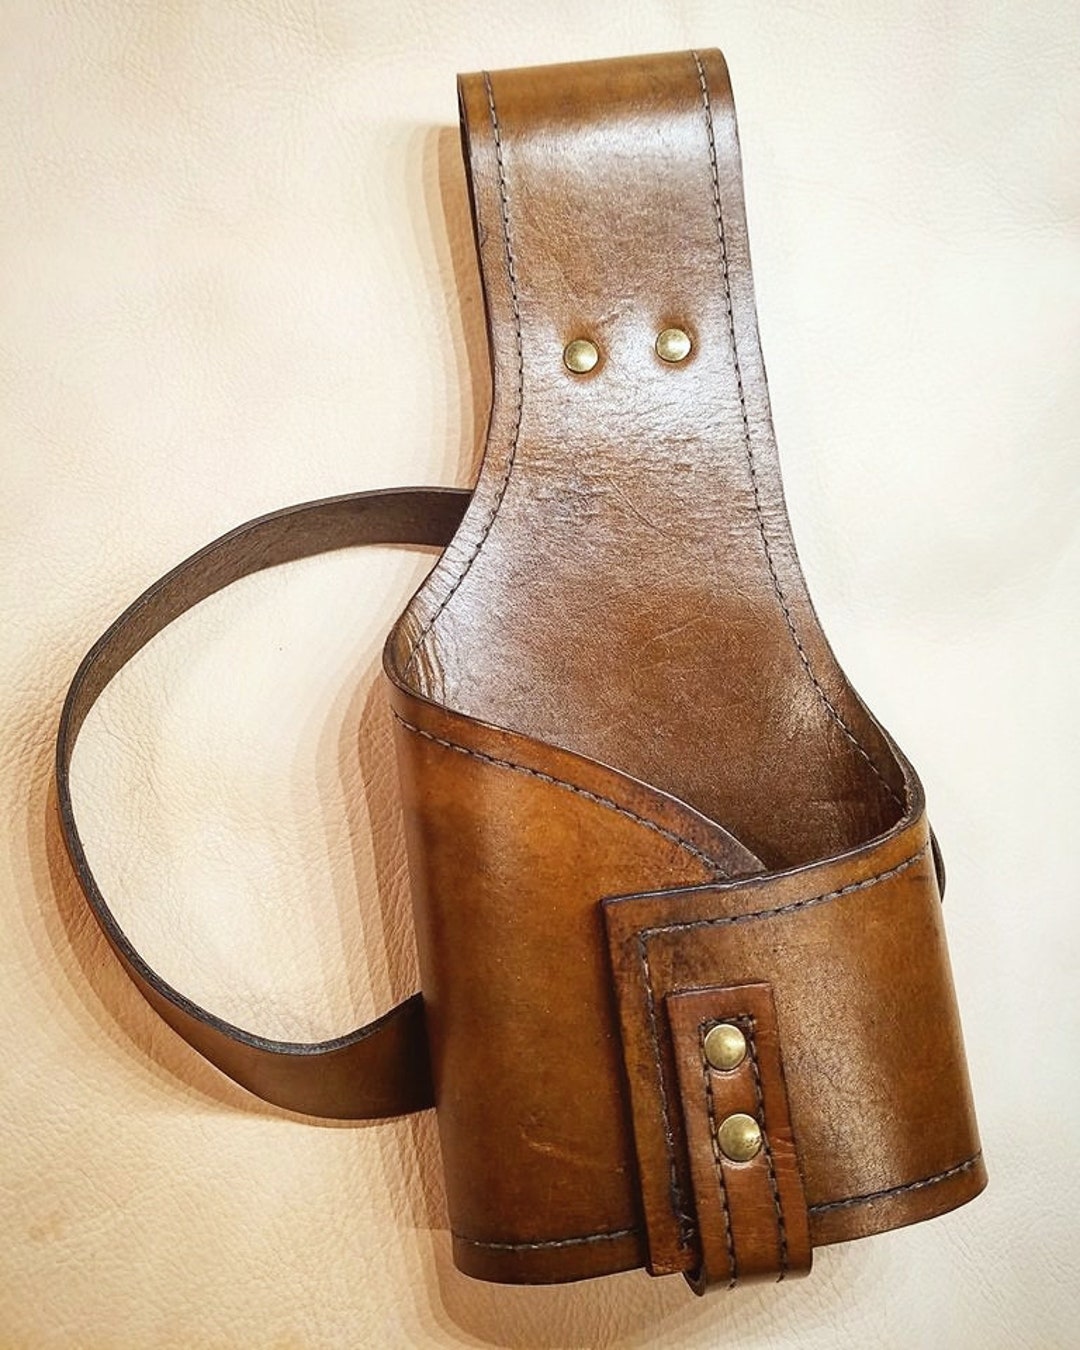  Realeather Crafts Wild West Holster Kit : Sports & Outdoors